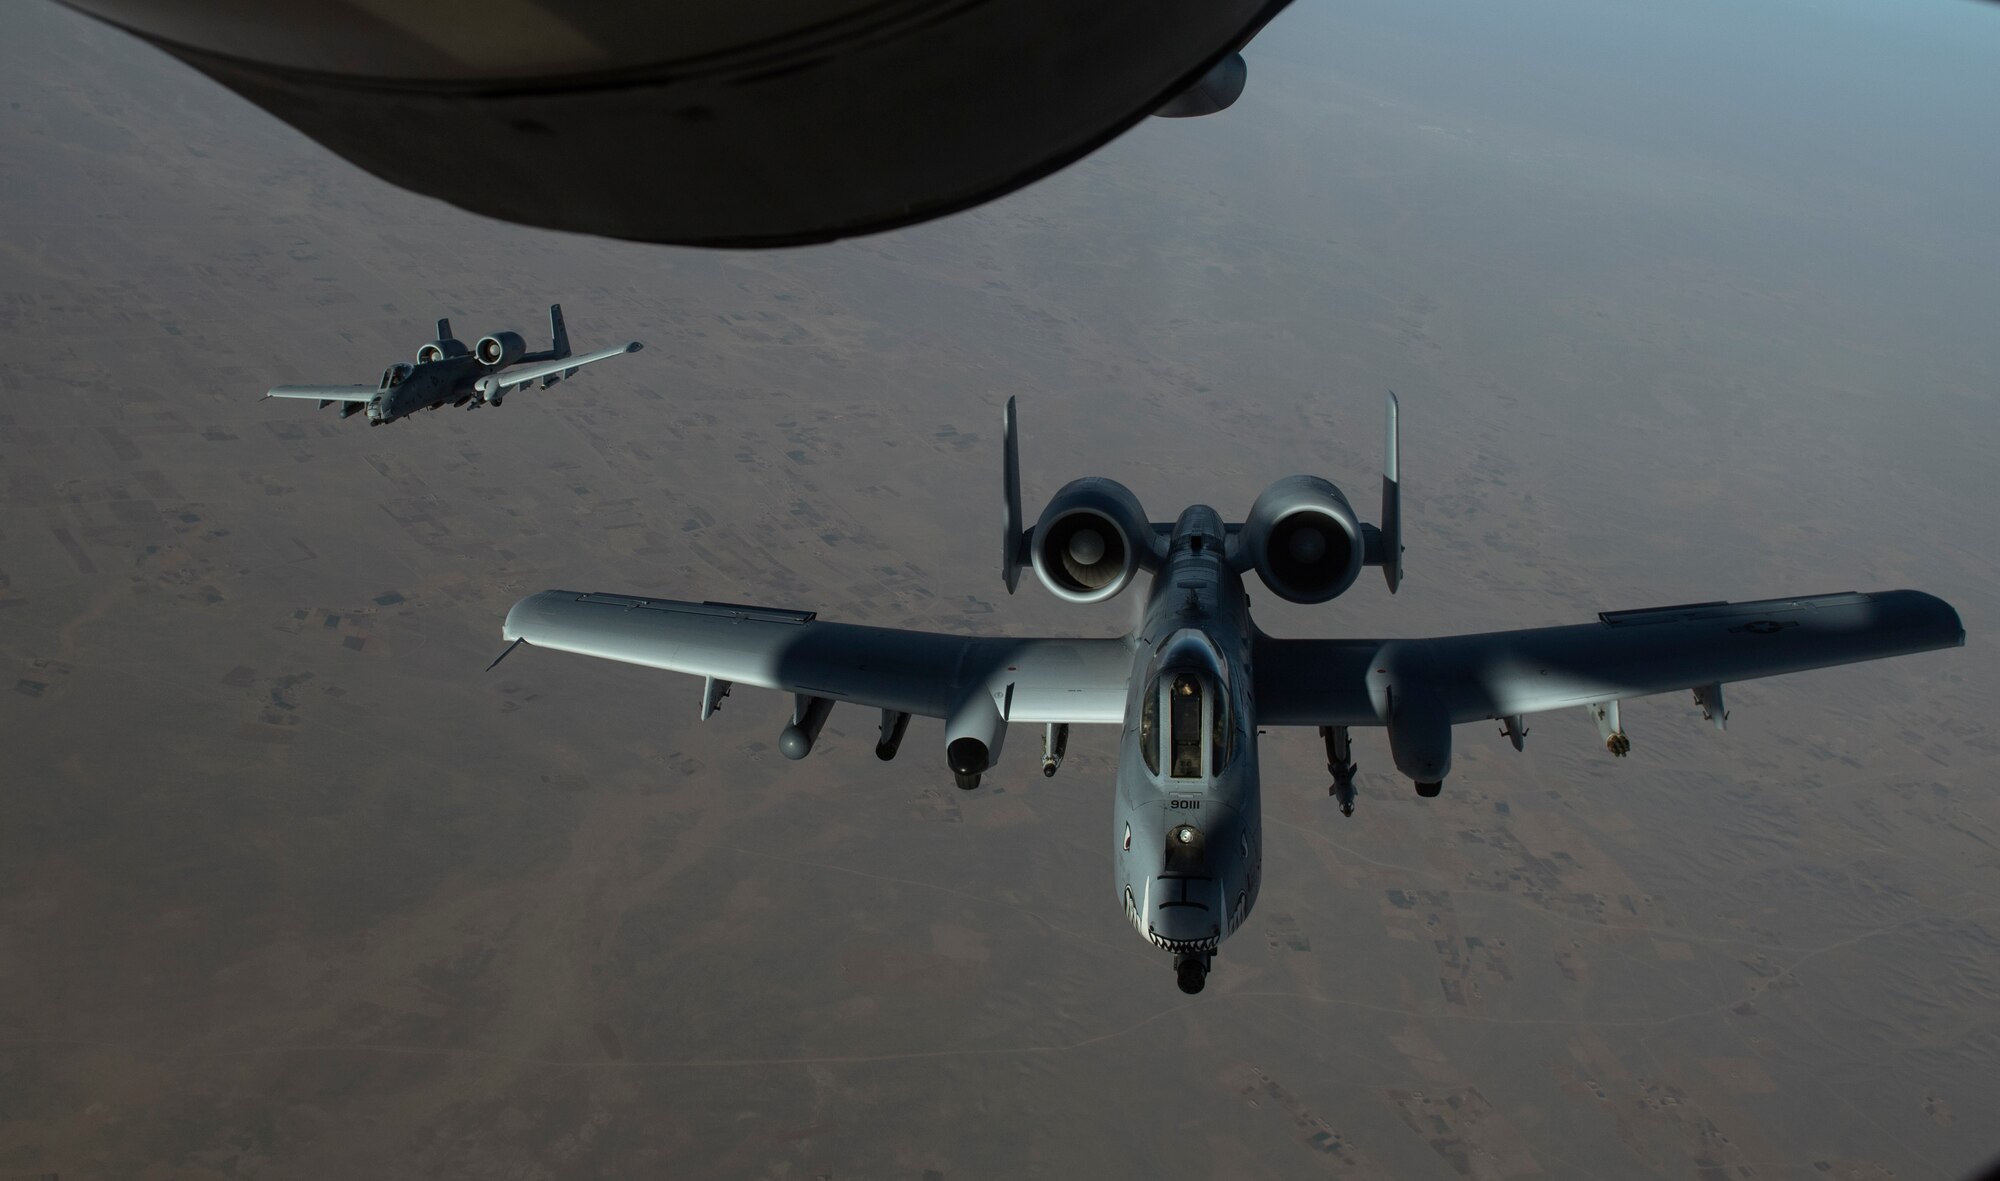 Two U.S. Air Force A-10 Thunderbolt IIs depart after receiving fuel from a KC-135 Stratotanker, assigned to the 340th Expeditionary Air Refueling Squadron Detachment 1, during a refueling mission over Afghanistan, Feb. 7, 2018.